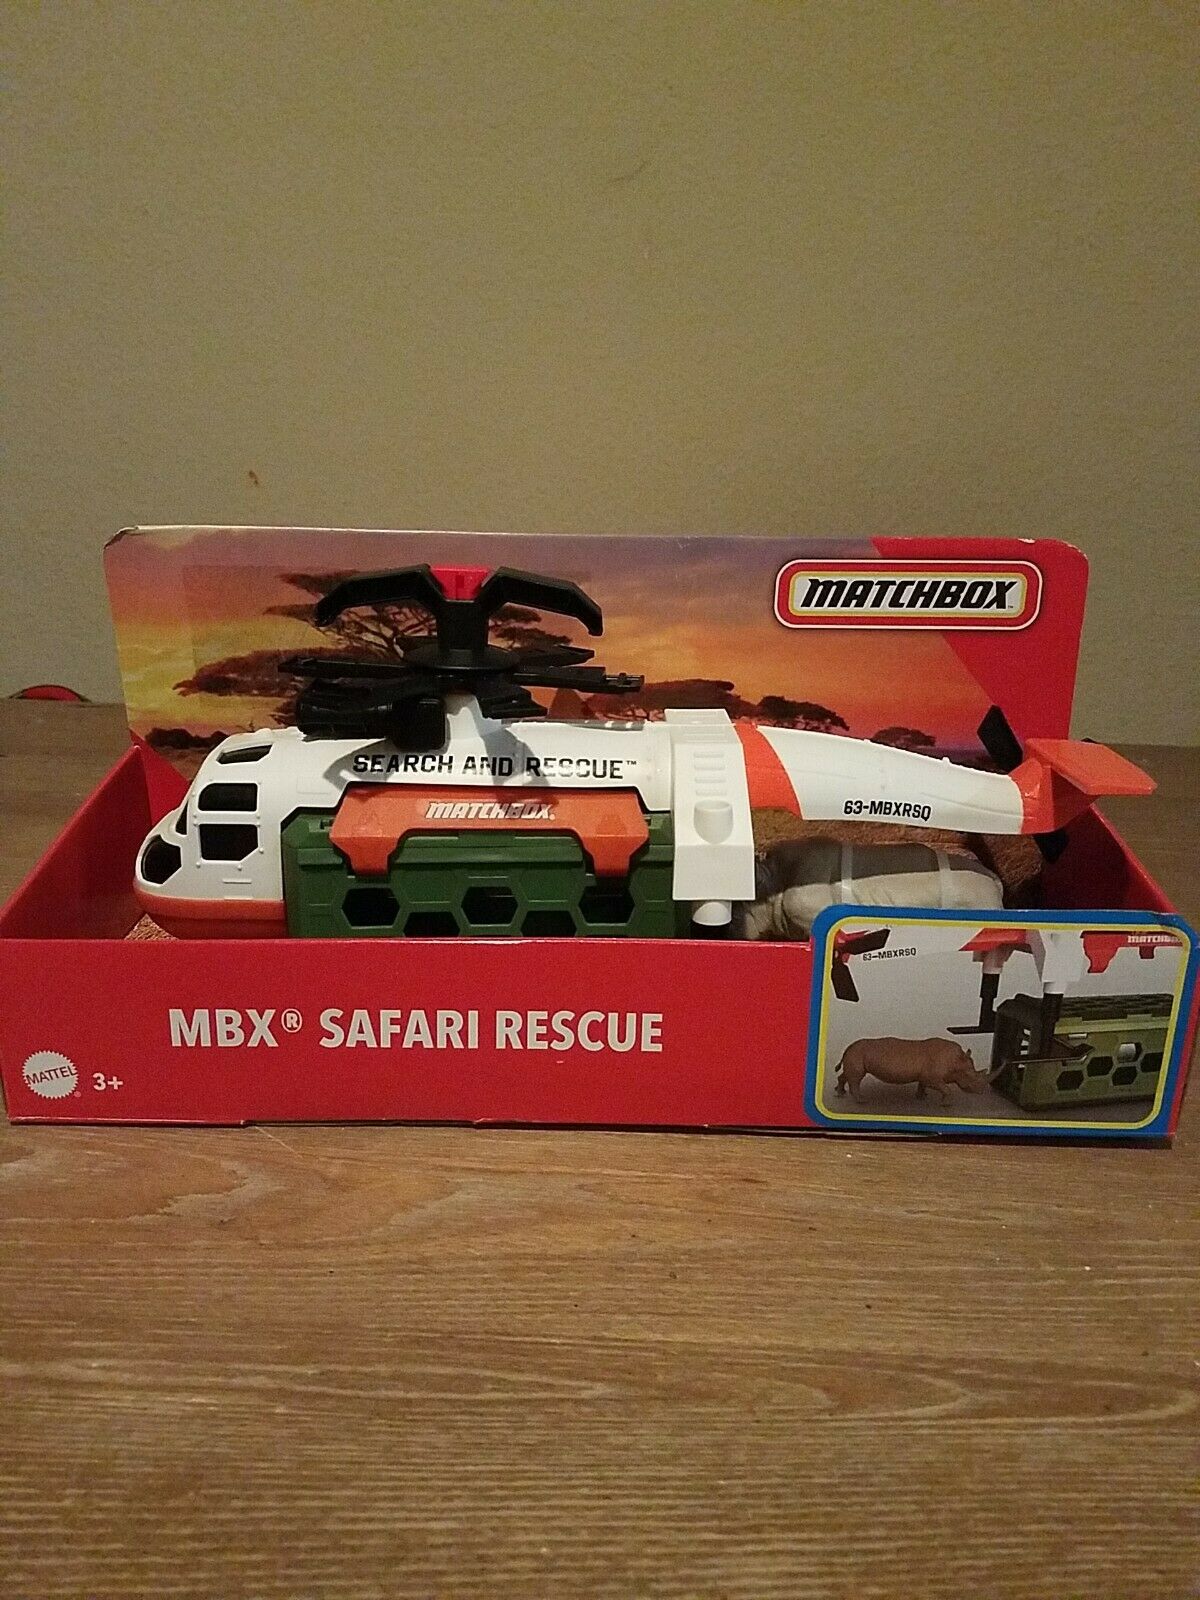 MBX Safari Rescue Matchbox Helicopter Fly The Rhino To Safety